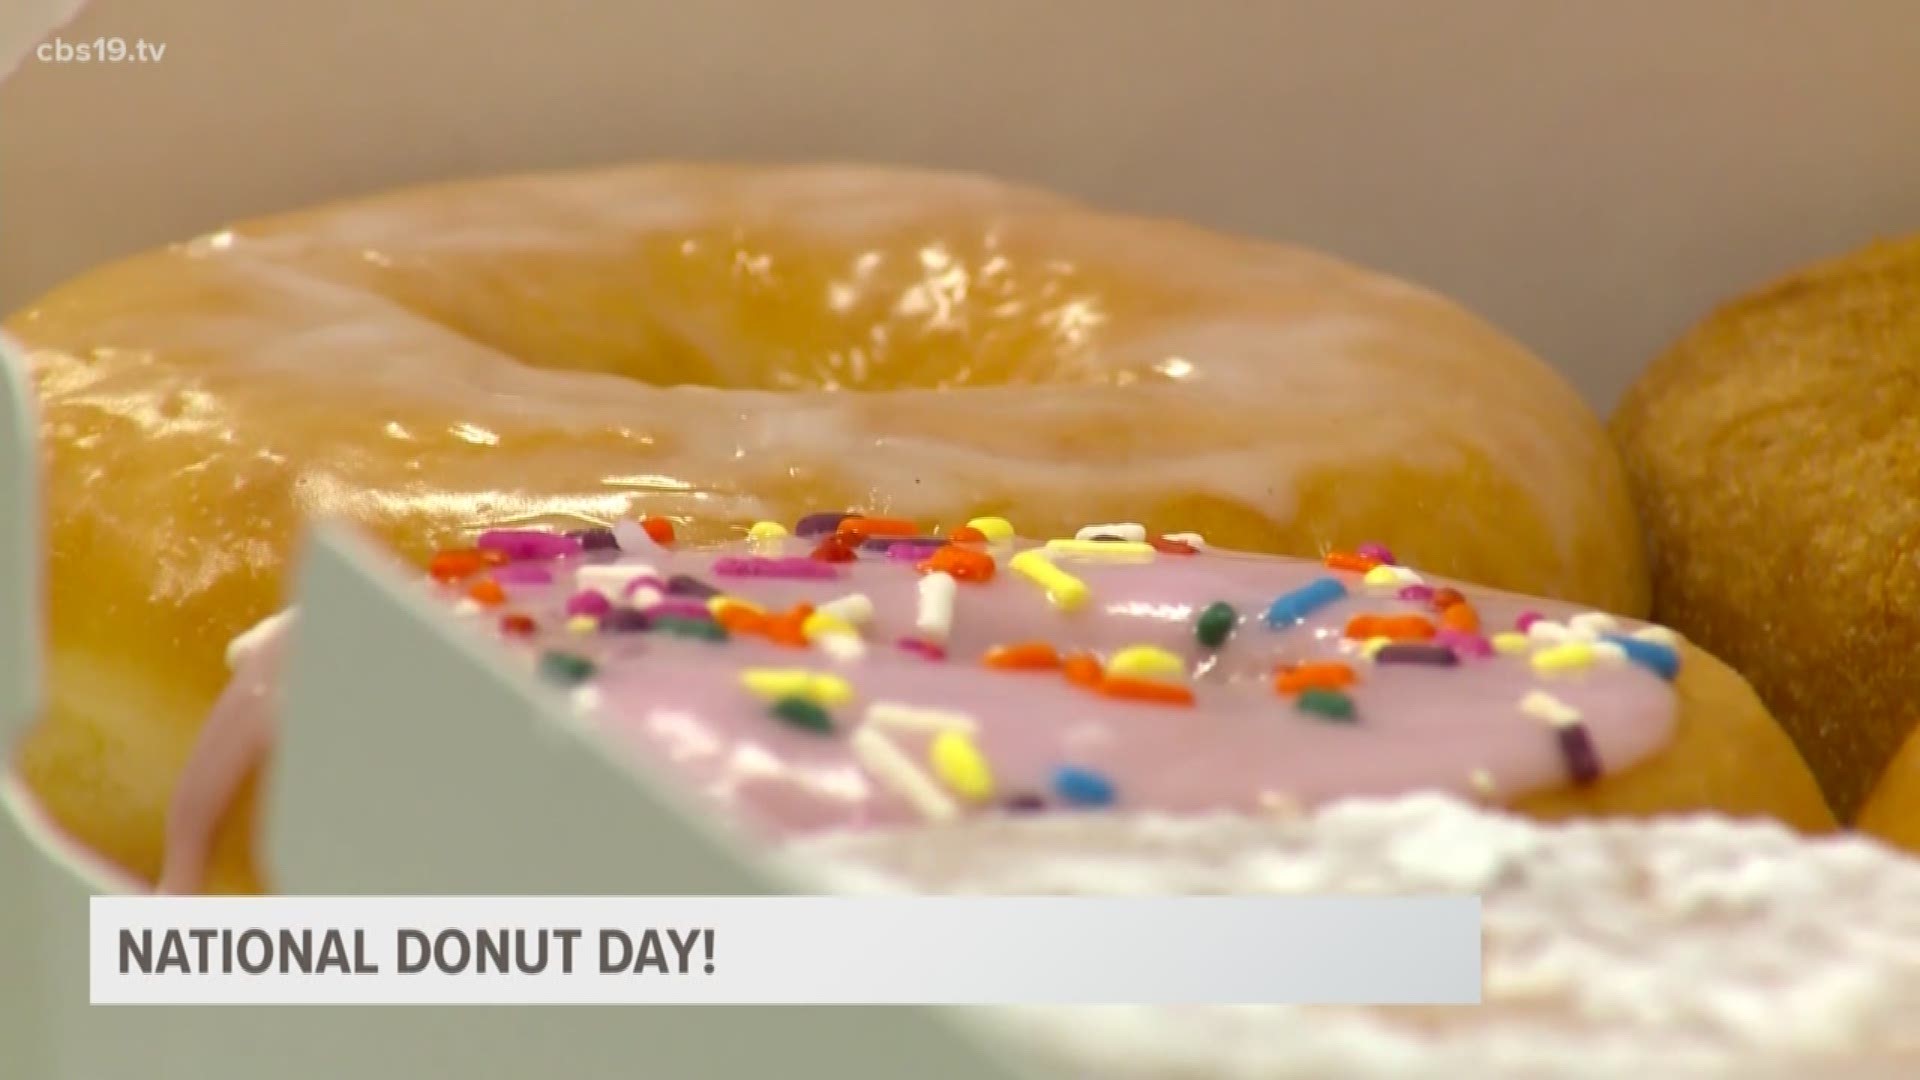 It's National Donut Day! Whether you're stopping at a local chain or national chain make sure to celebrate!